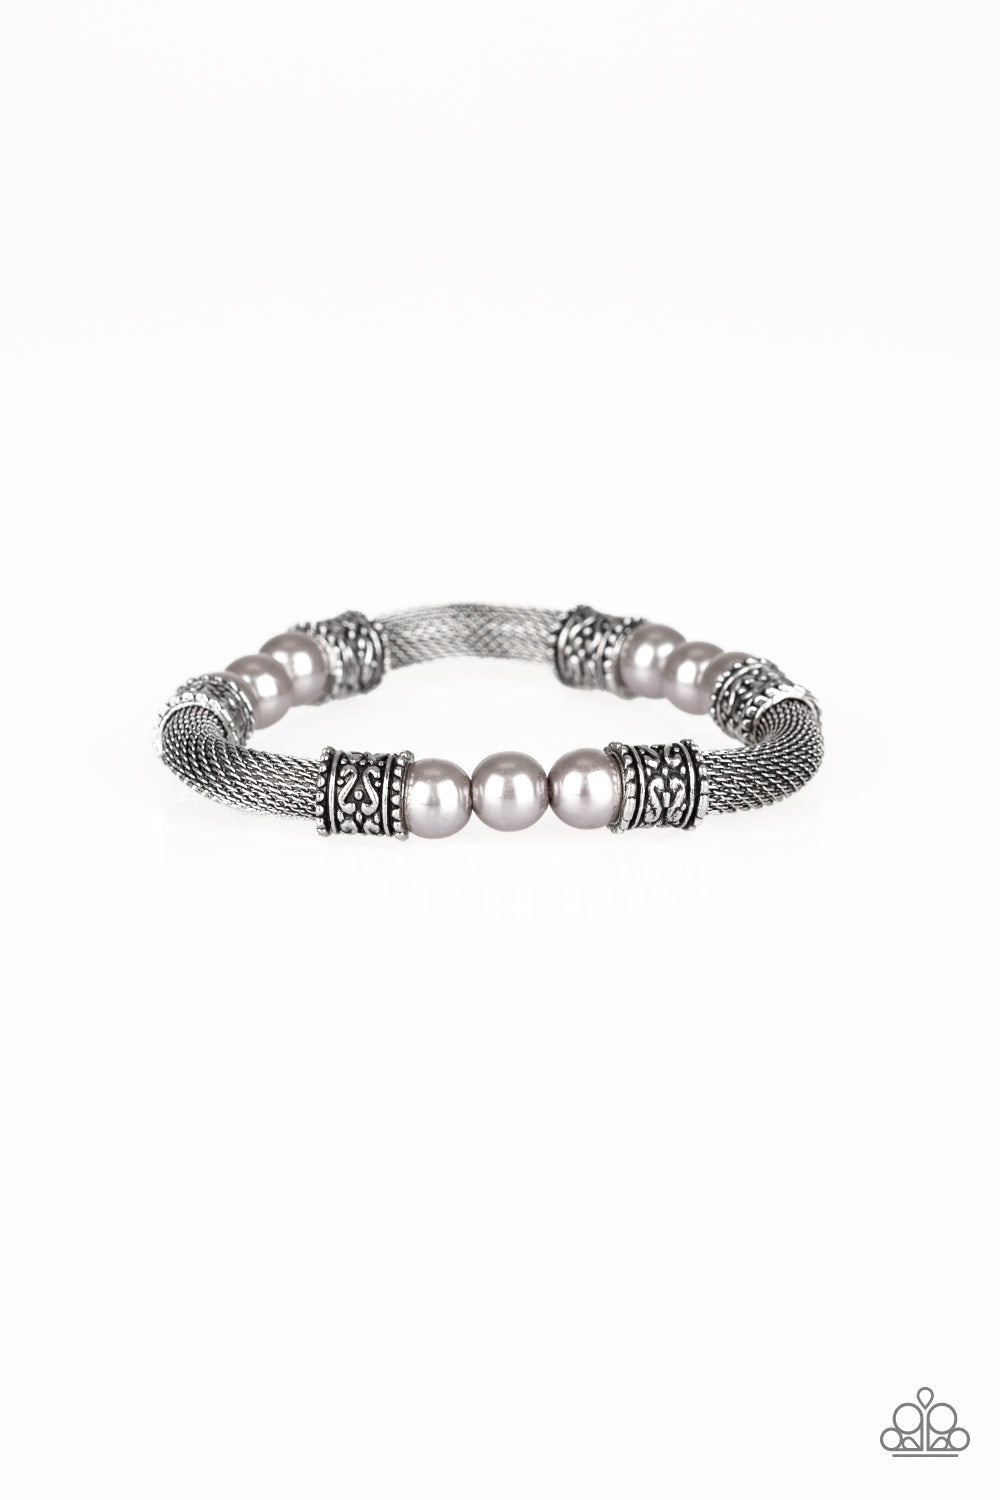 Pearly silver beads, ornate silver accents, and sections of silver mesh chain are threaded along a stretchy band around the wrist for a refined flair.